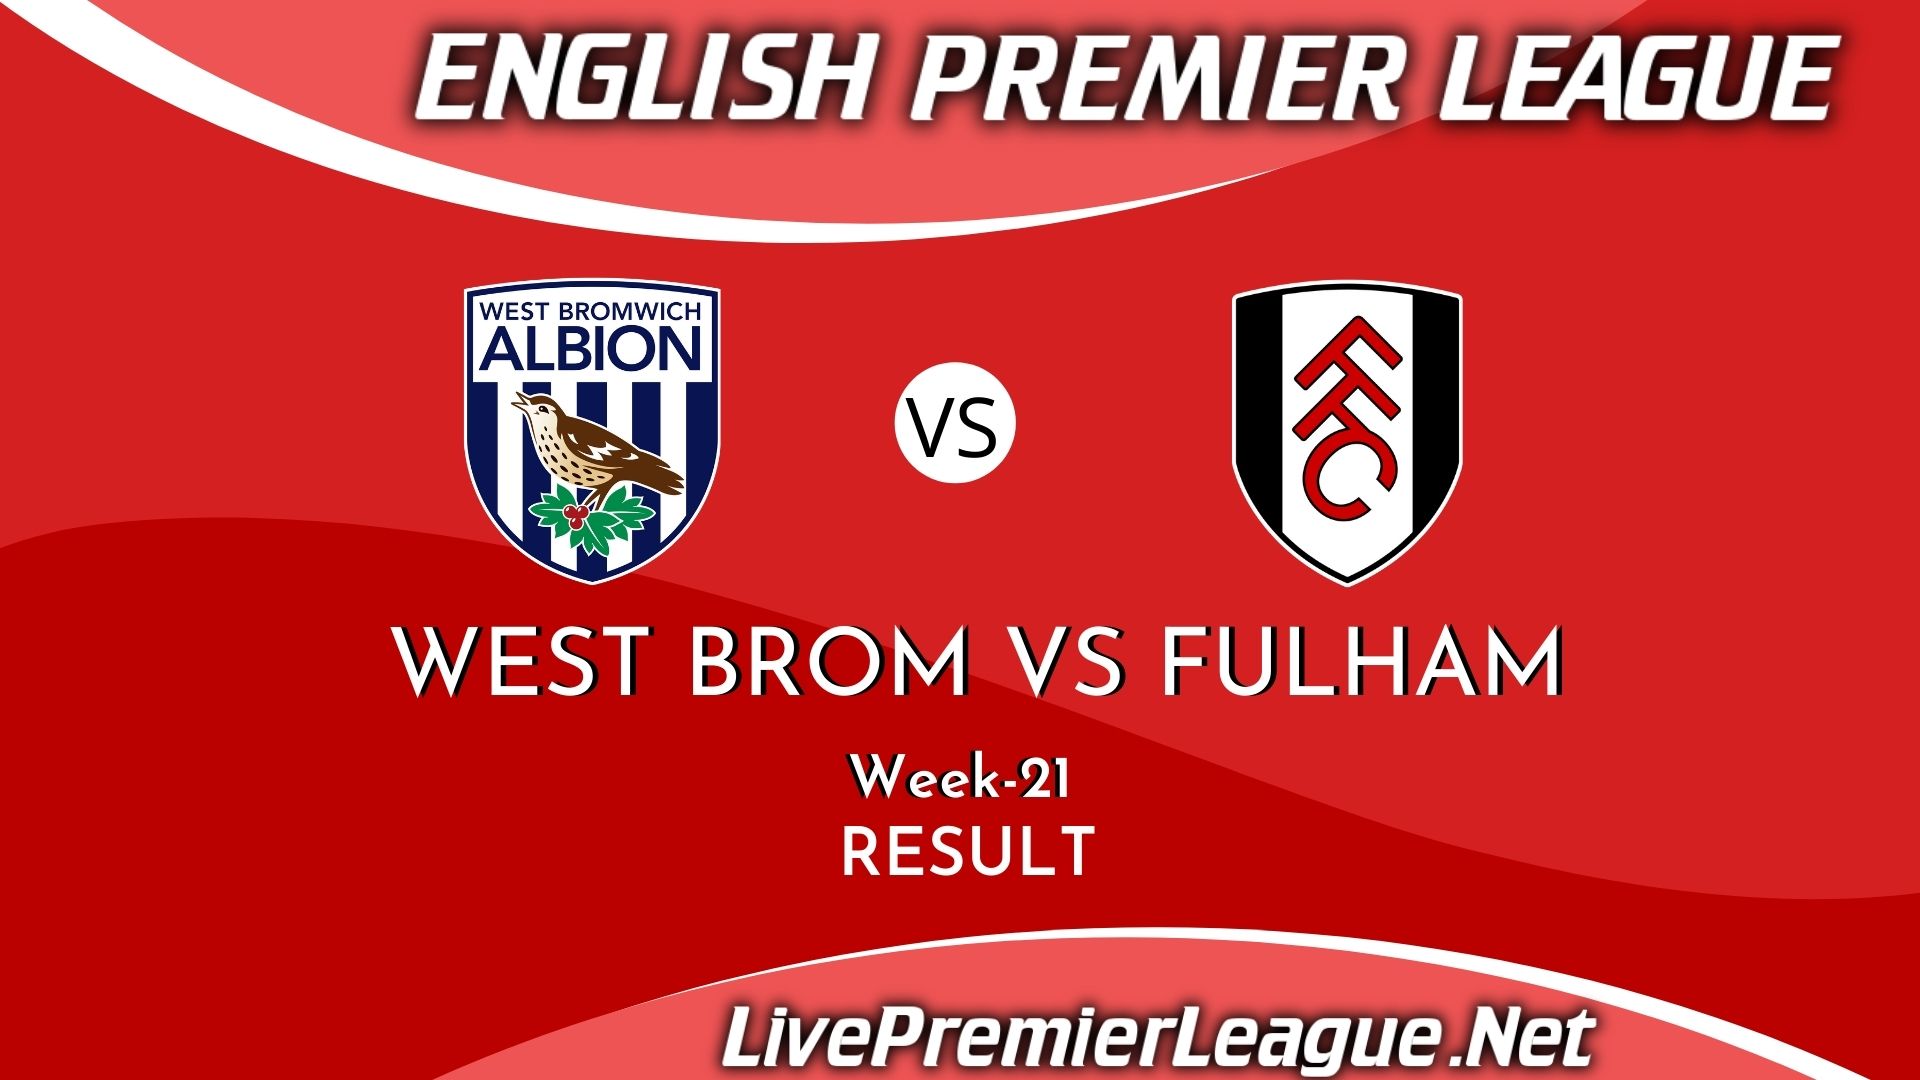 West Bromwich Albion Vs Fulham | Result 2021 EPL Week 21